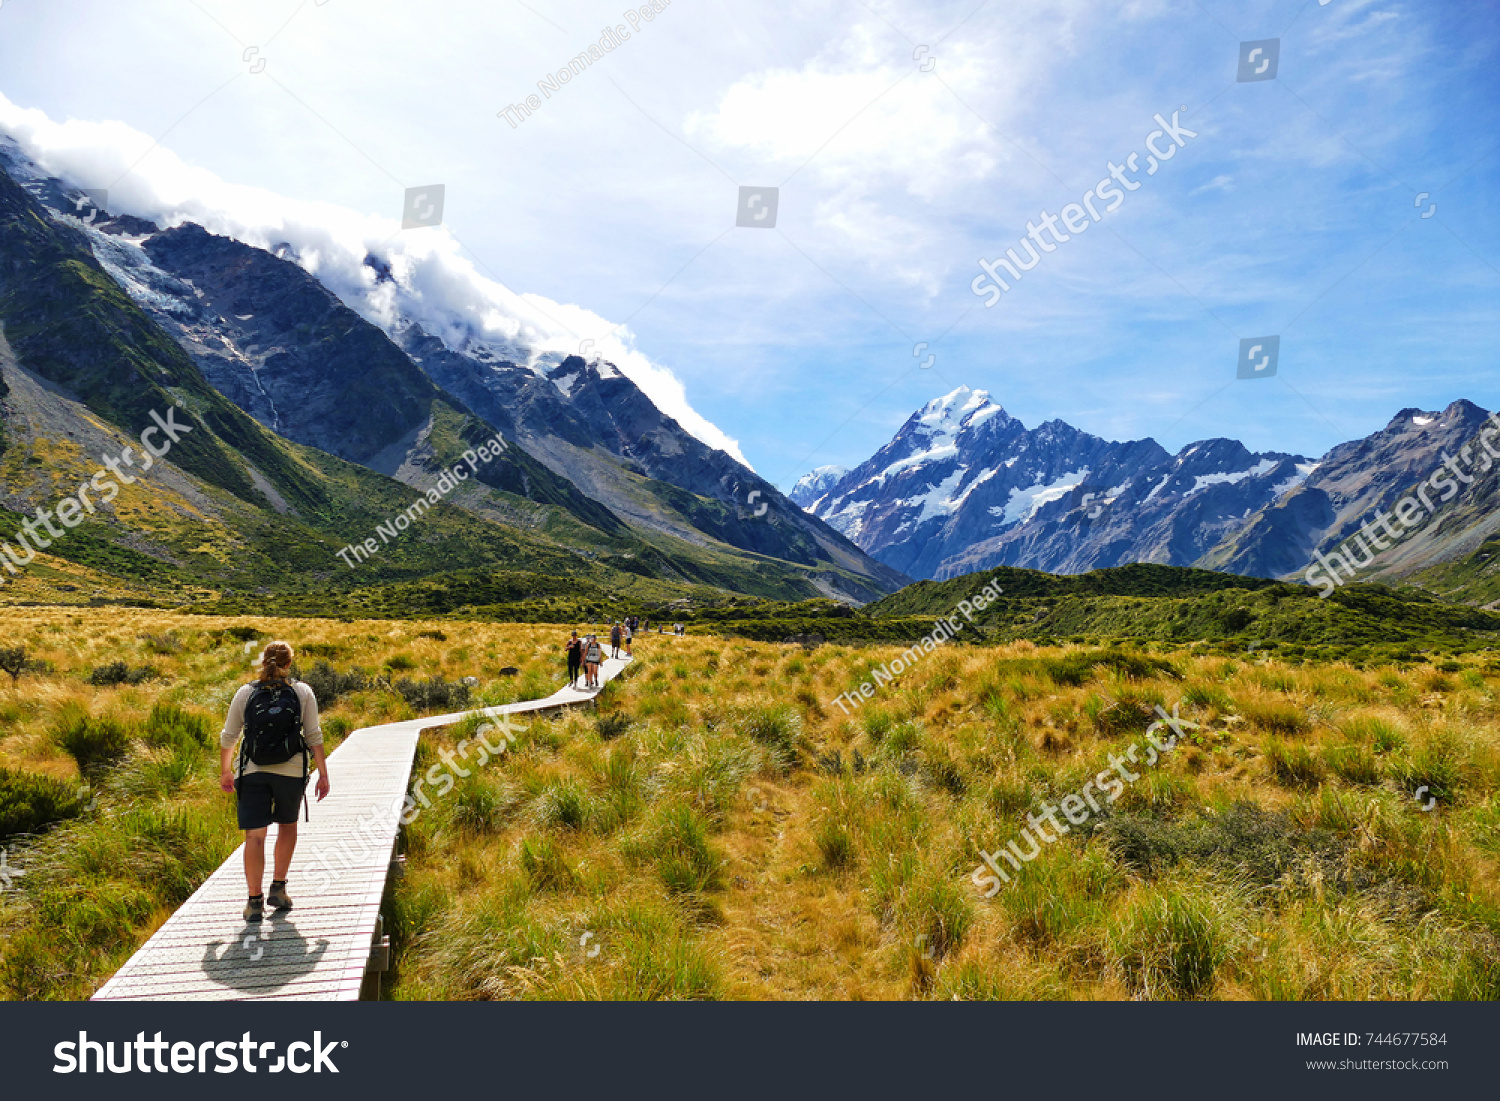 Walking along the great winding Hooker Valley track at Mount Cook, New Zealand.
 (19-03-2017) #744677584